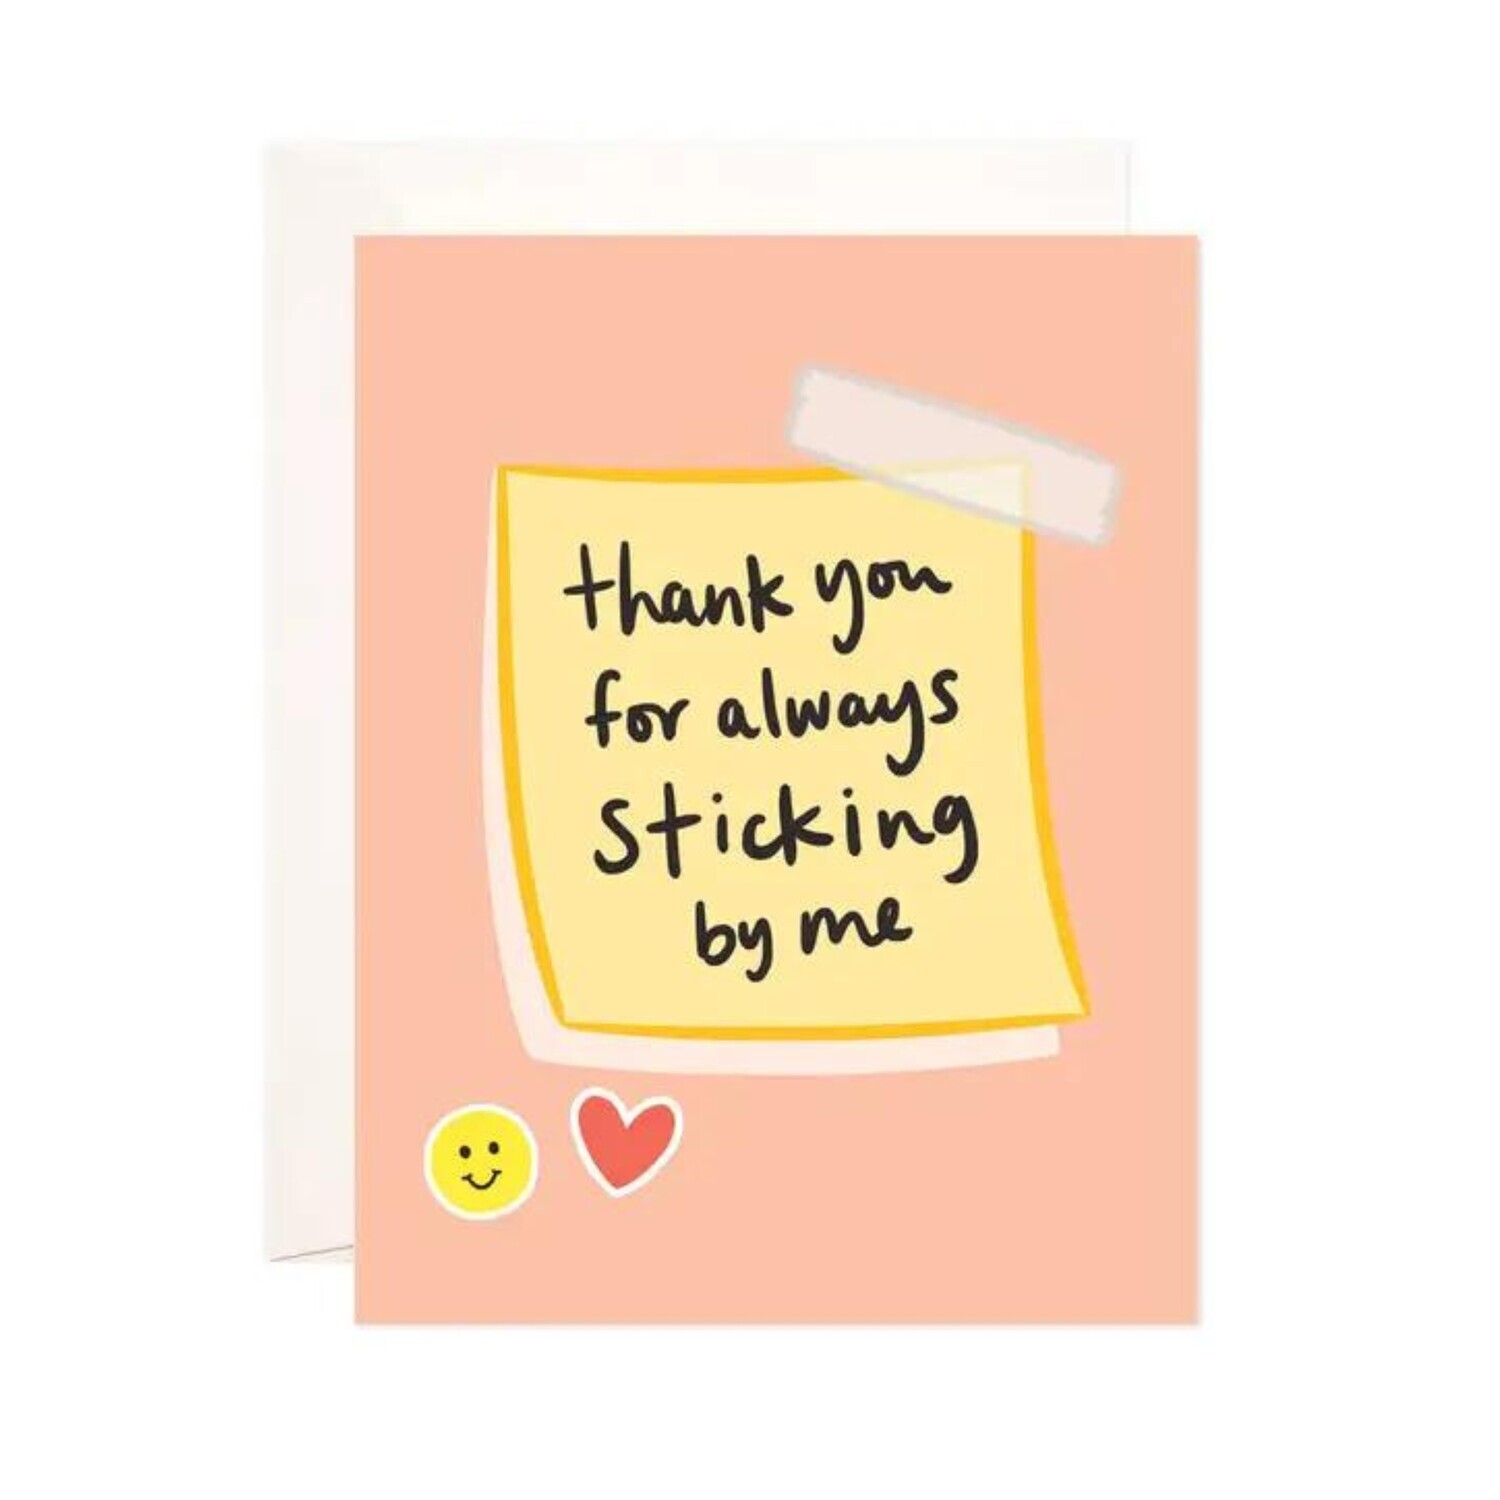 STICKING BY ME CARD